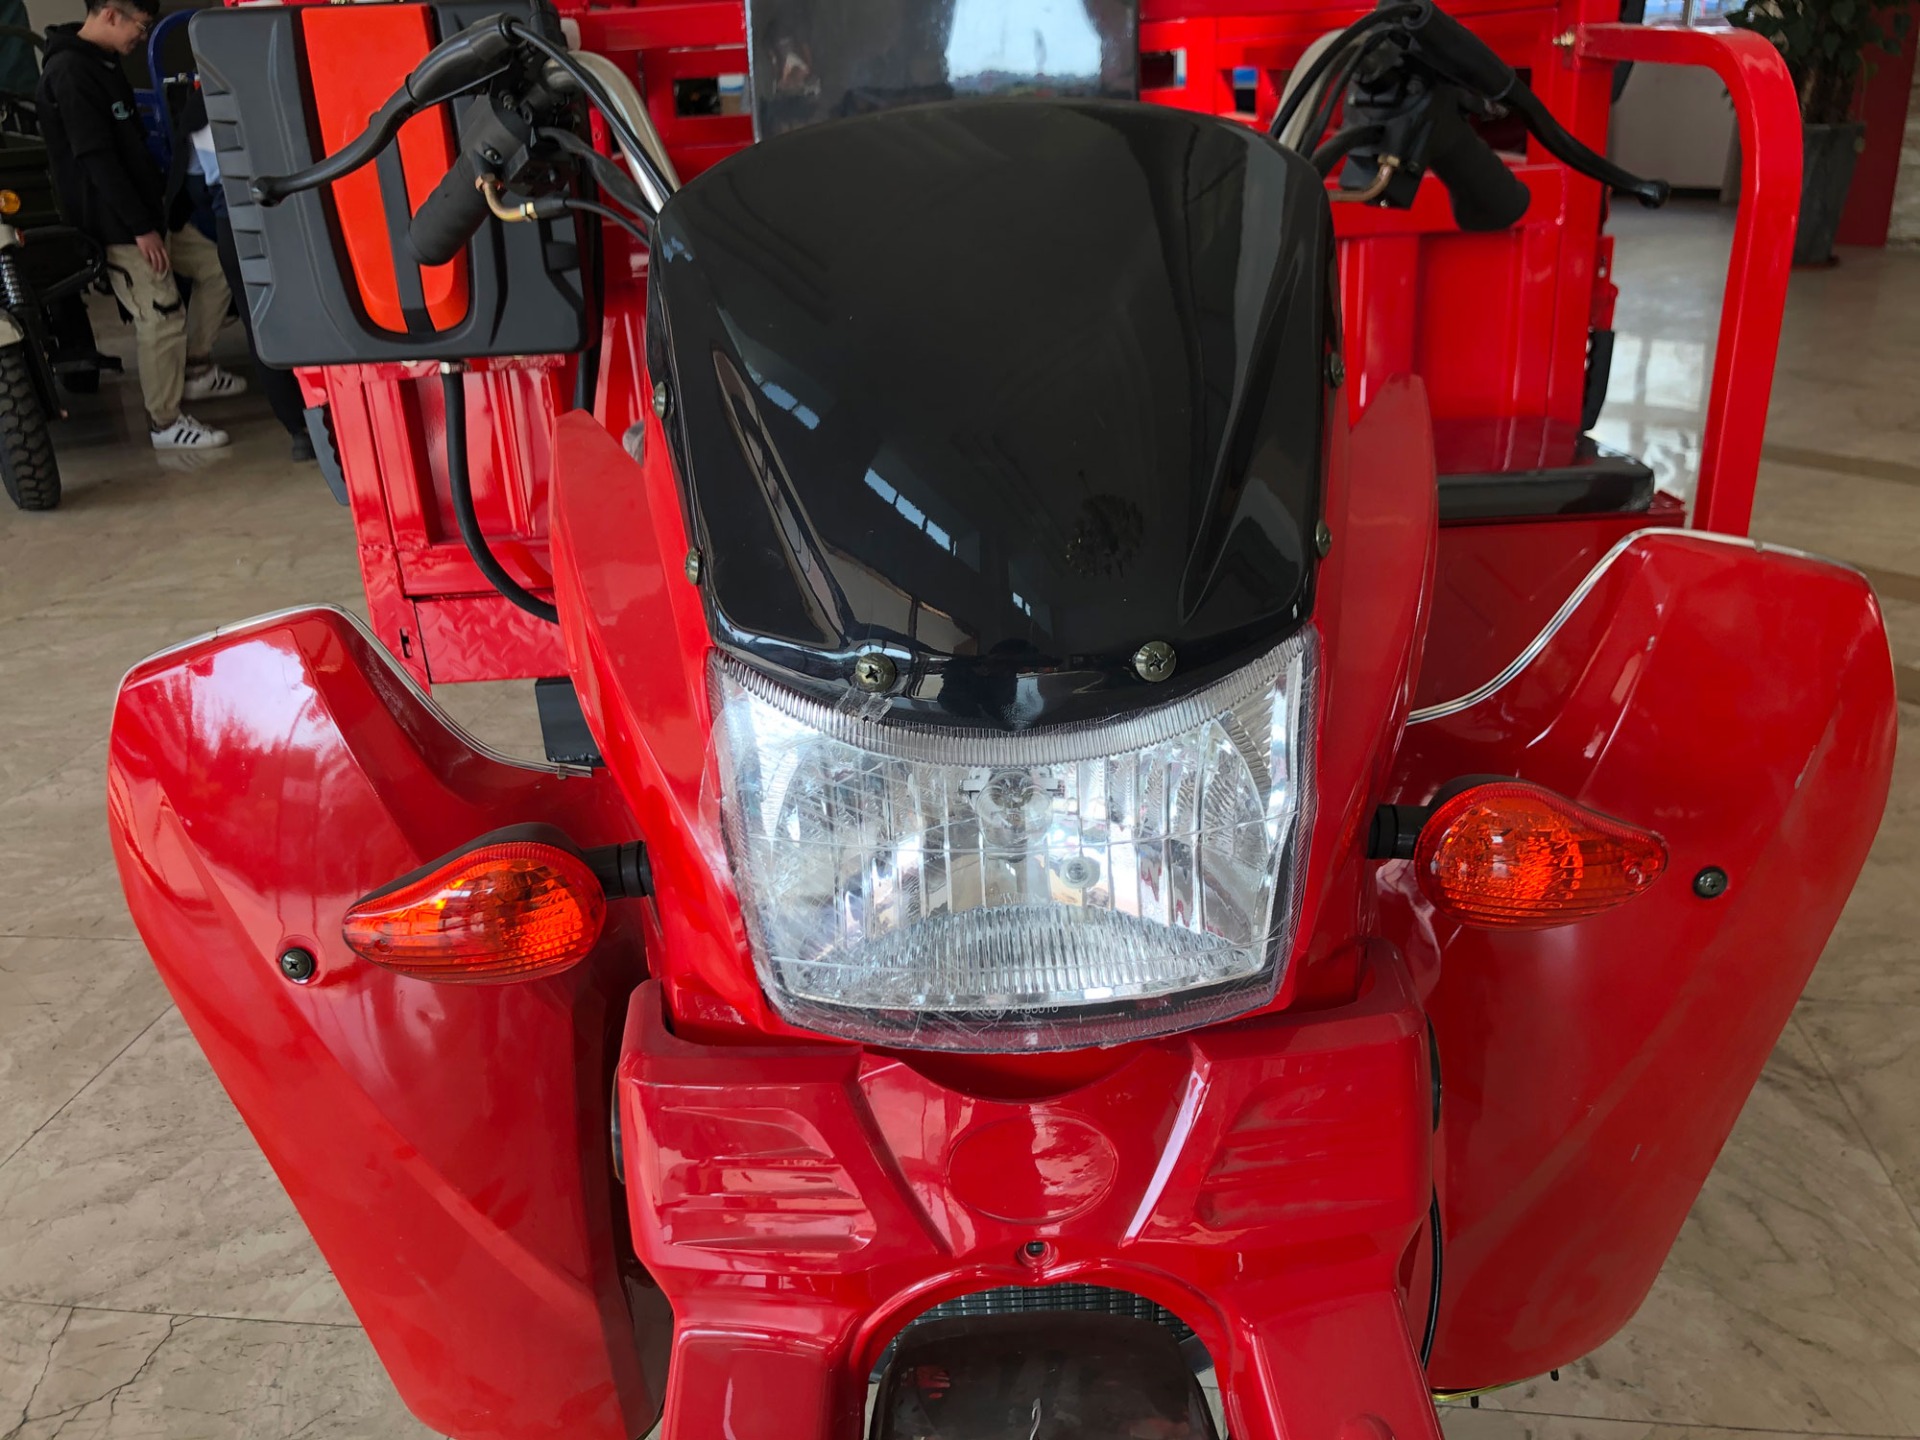 Three Wheeler  LIFAN ZONGSHEN 200CC/250CC/300CC engine ghana transport tricycle vans with motor cargo petrol tricycle